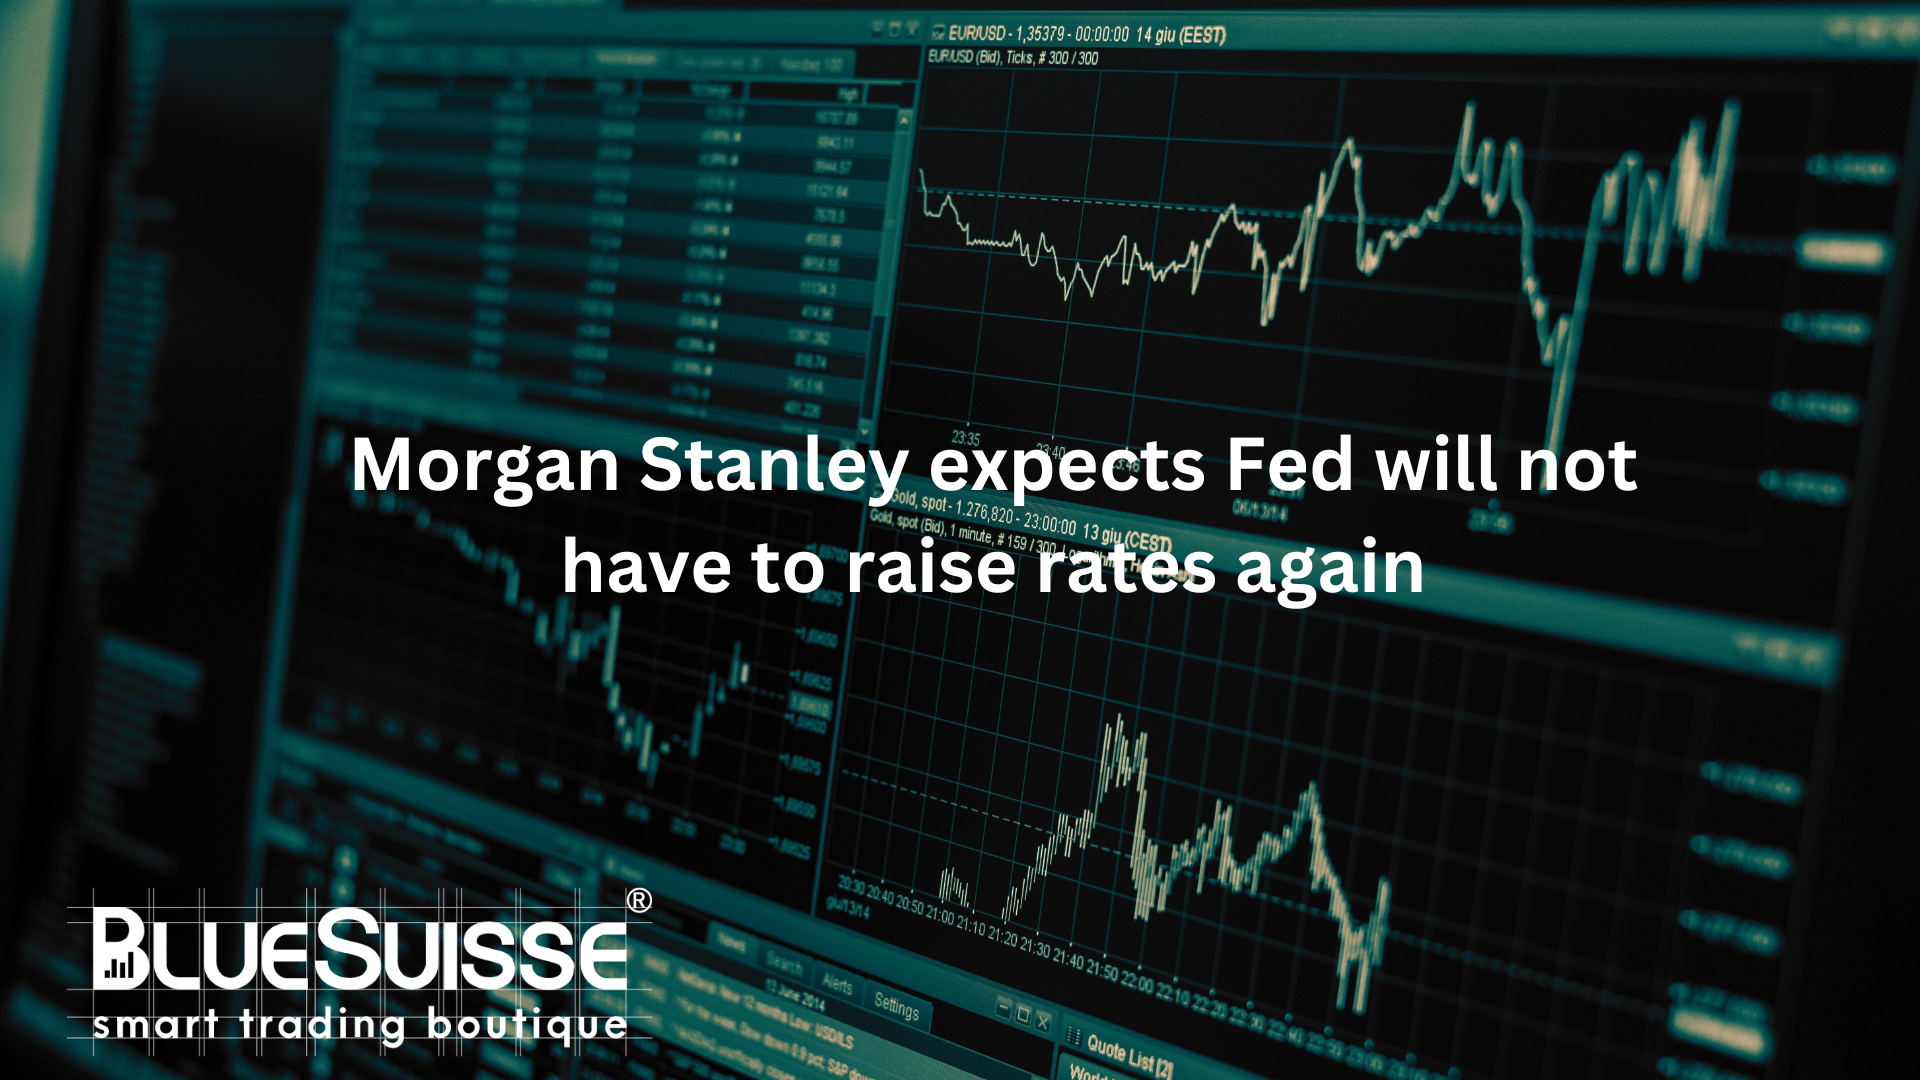 Morgan Stanley expects Fed will not have to raise rates again